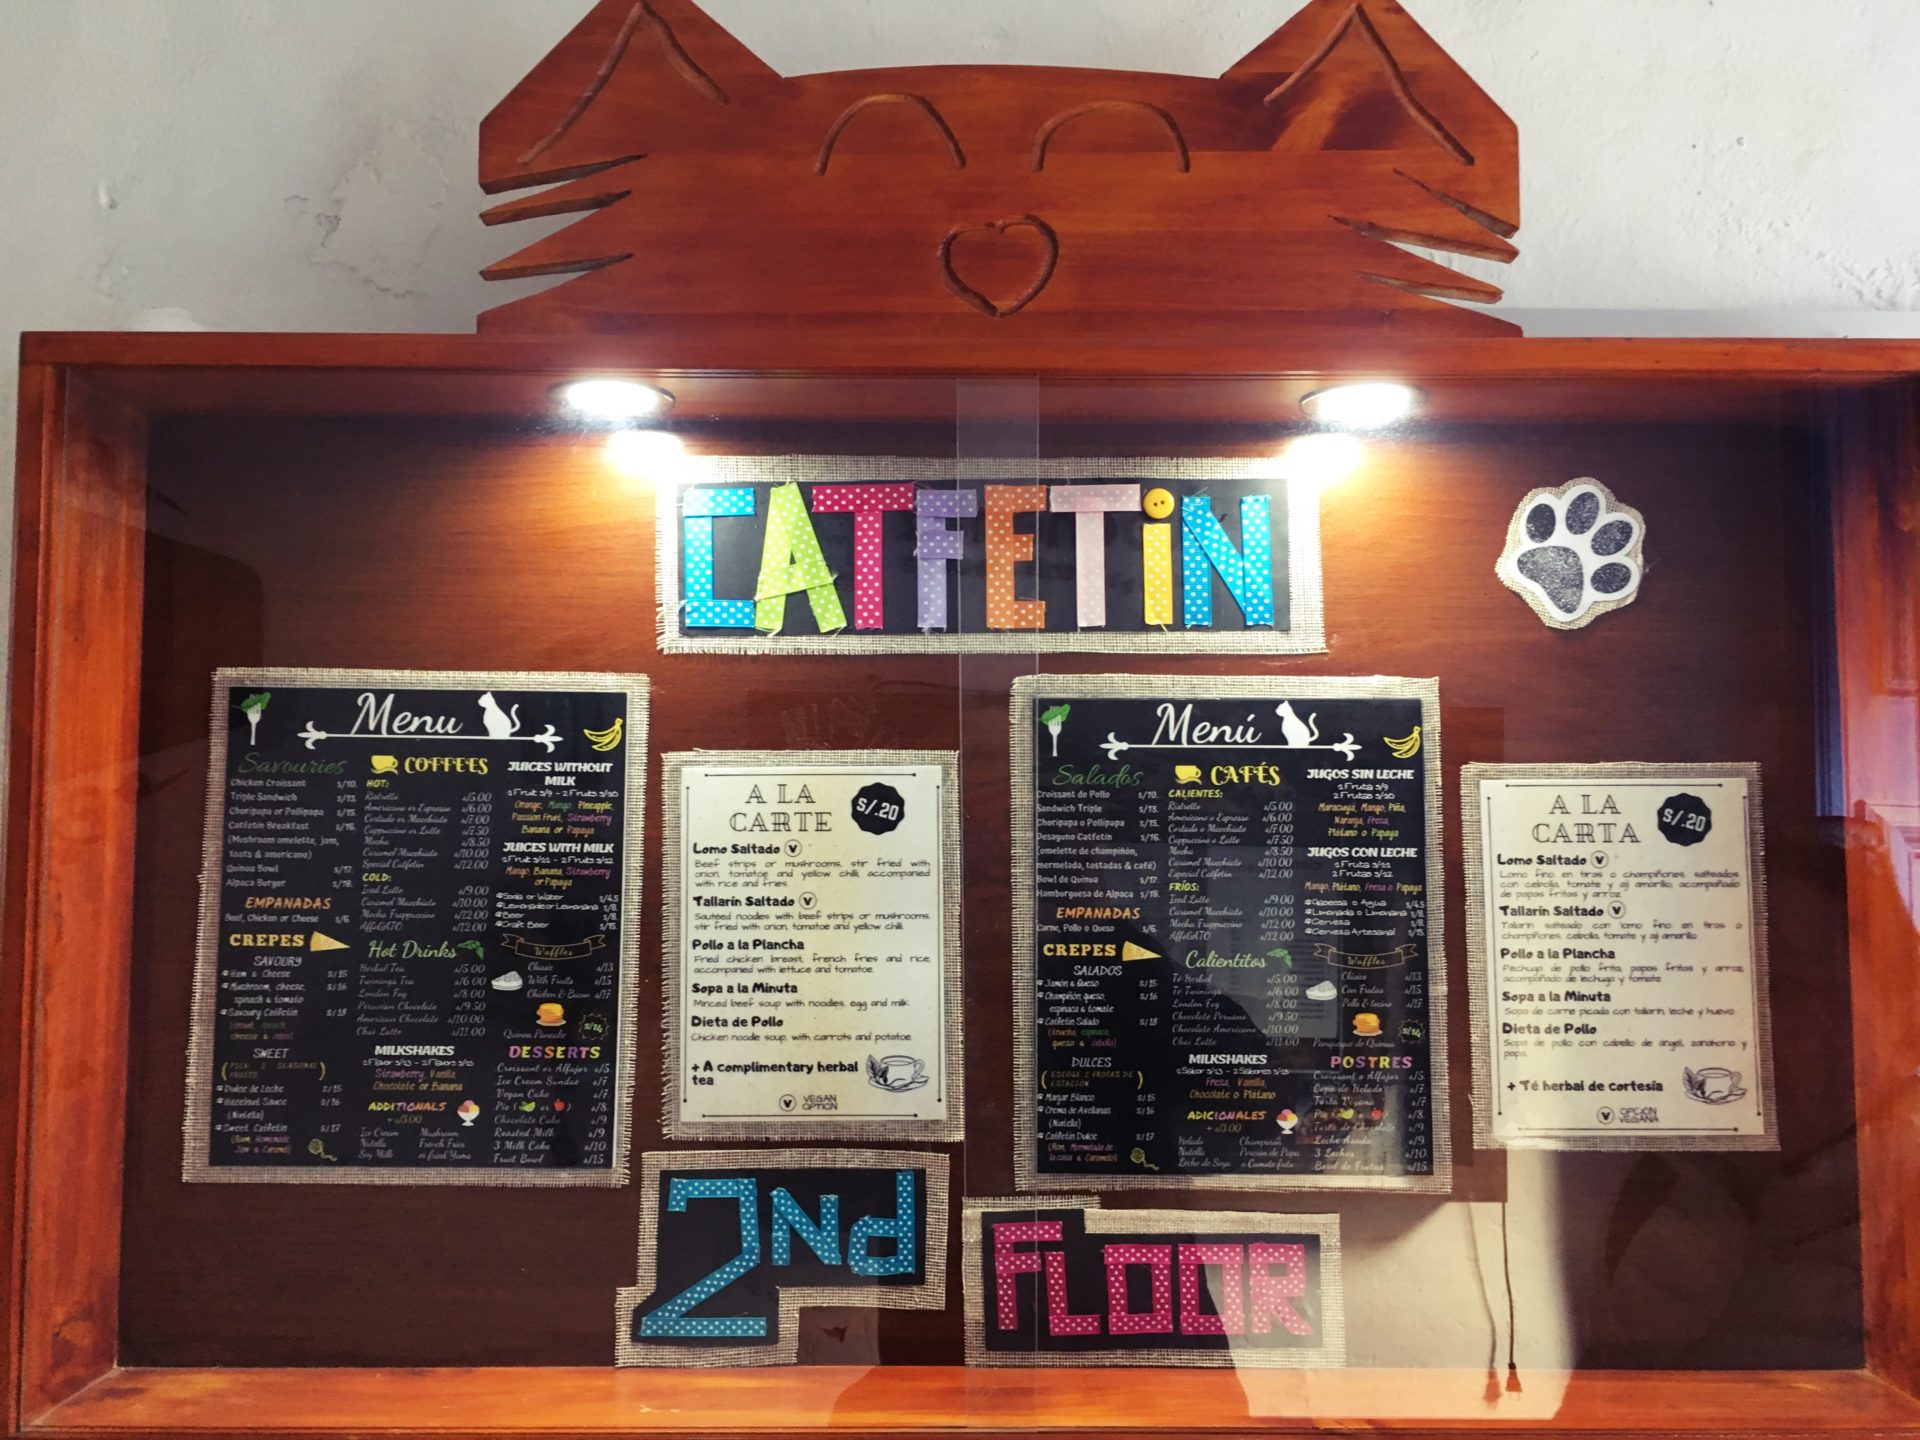 Cat, Cafe, Cafeteria, Cafetin, ペルー, クスコ, ねこ, カフェ